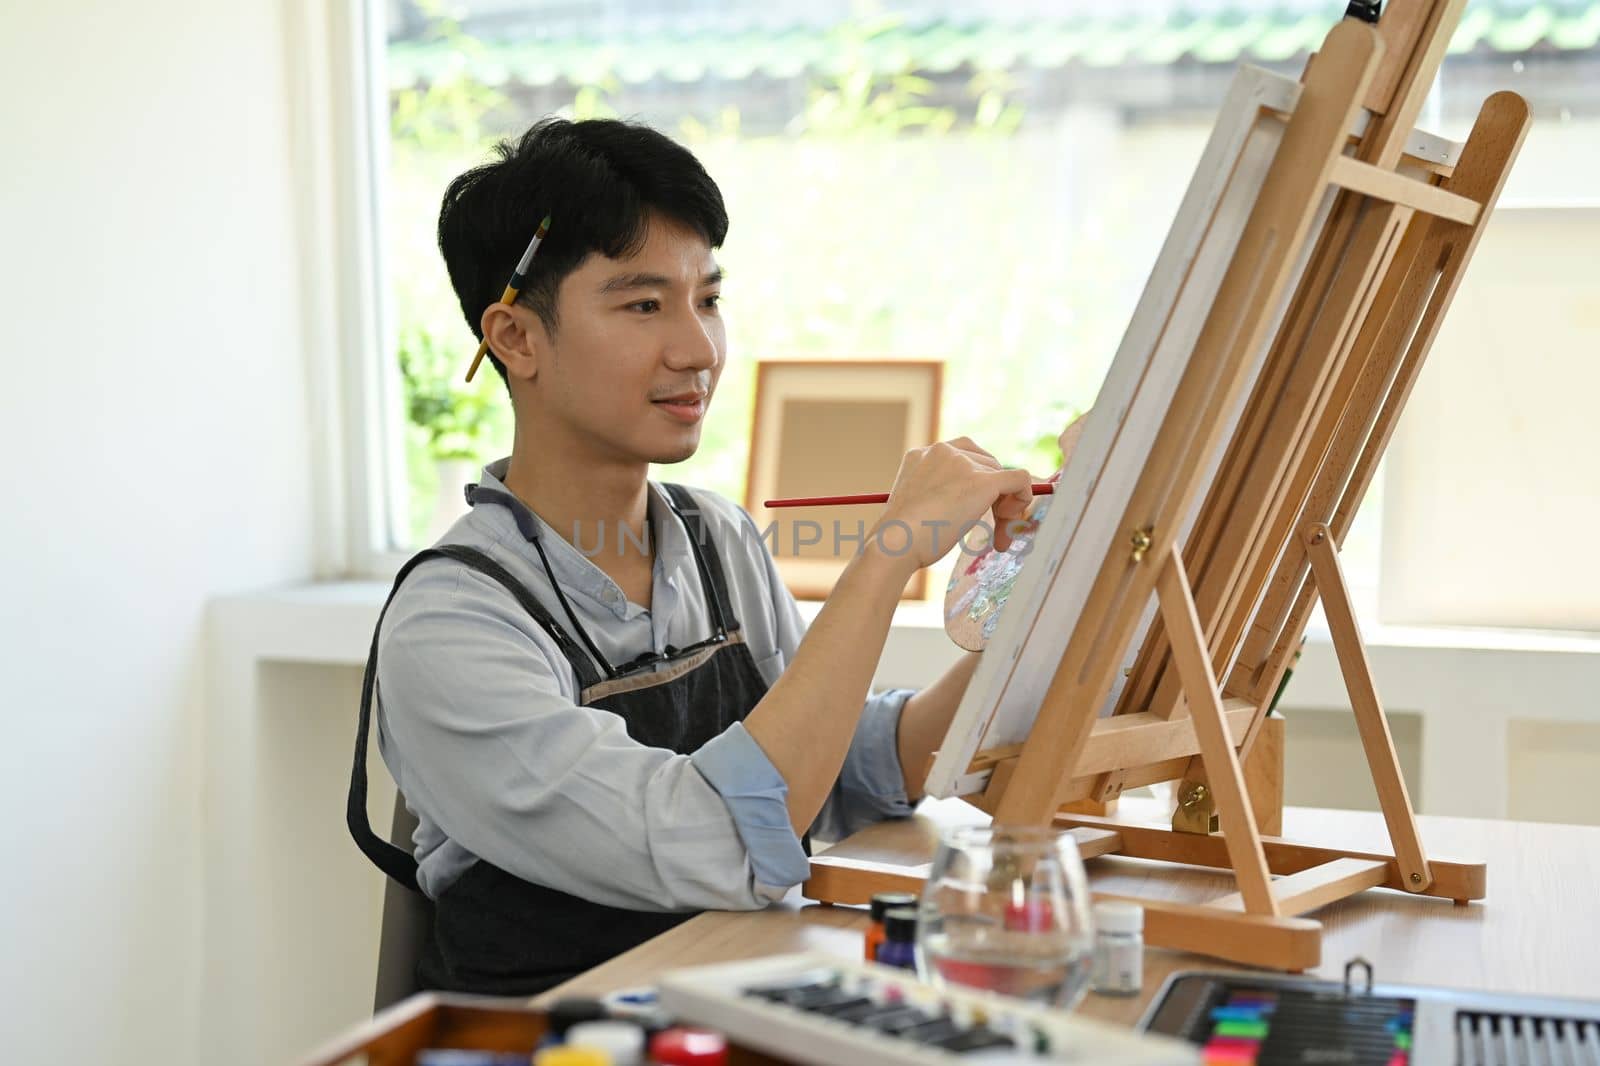 Concentred asian male artist sitting in front of canvas and painting picture with watercolor. Leisure activity concept.